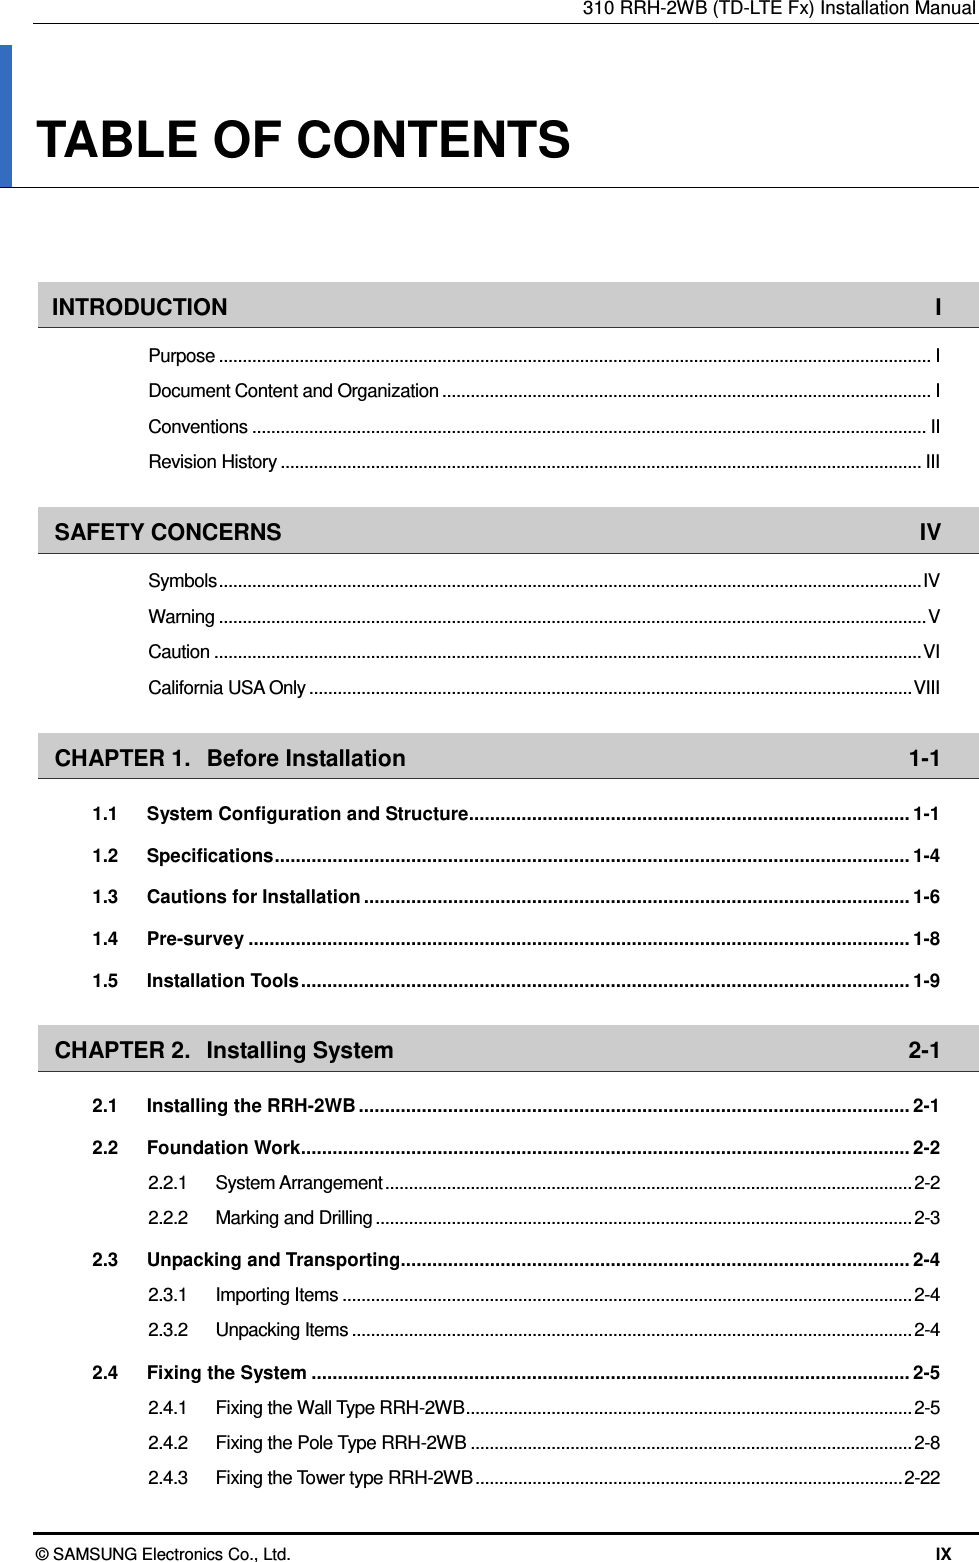 310 RRH-2WB (TD-LTE Fx) Installation Manual © SAMSUNG Electronics Co., Ltd.  IX TABLE OF CONTENTS   INTRODUCTION  I Purpose ...................................................................................................................................................... I Document Content and Organization ....................................................................................................... I Conventions .............................................................................................................................................. II Revision History ....................................................................................................................................... III SAFETY CONCERNS  IV Symbols .................................................................................................................................................... IV Warning ..................................................................................................................................................... V Caution ..................................................................................................................................................... VI California USA Only ............................................................................................................................... VIII CHAPTER 1. Before Installation  1-1 1.1 System Configuration and Structure .................................................................................... 1-1 1.2 Specifications ......................................................................................................................... 1-4 1.3 Cautions for Installation ........................................................................................................ 1-6 1.4 Pre-survey .............................................................................................................................. 1-8 1.5 Installation Tools .................................................................................................................... 1-9 CHAPTER 2. Installing System  2-1 2.1 Installing the RRH-2WB ......................................................................................................... 2-1 2.2 Foundation Work .................................................................................................................... 2-2 2.2.1 System Arrangement ............................................................................................................... 2-2 2.2.2 Marking and Drilling ................................................................................................................. 2-3 2.3 Unpacking and Transporting................................................................................................. 2-4 2.3.1 Importing Items ........................................................................................................................ 2-4 2.3.2 Unpacking Items ...................................................................................................................... 2-4 2.4 Fixing the System .................................................................................................................. 2-5 2.4.1 Fixing the Wall Type RRH-2WB .............................................................................................. 2-5 2.4.2 Fixing the Pole Type RRH-2WB ............................................................................................. 2-8 2.4.3 Fixing the Tower type RRH-2WB .......................................................................................... 2-22 